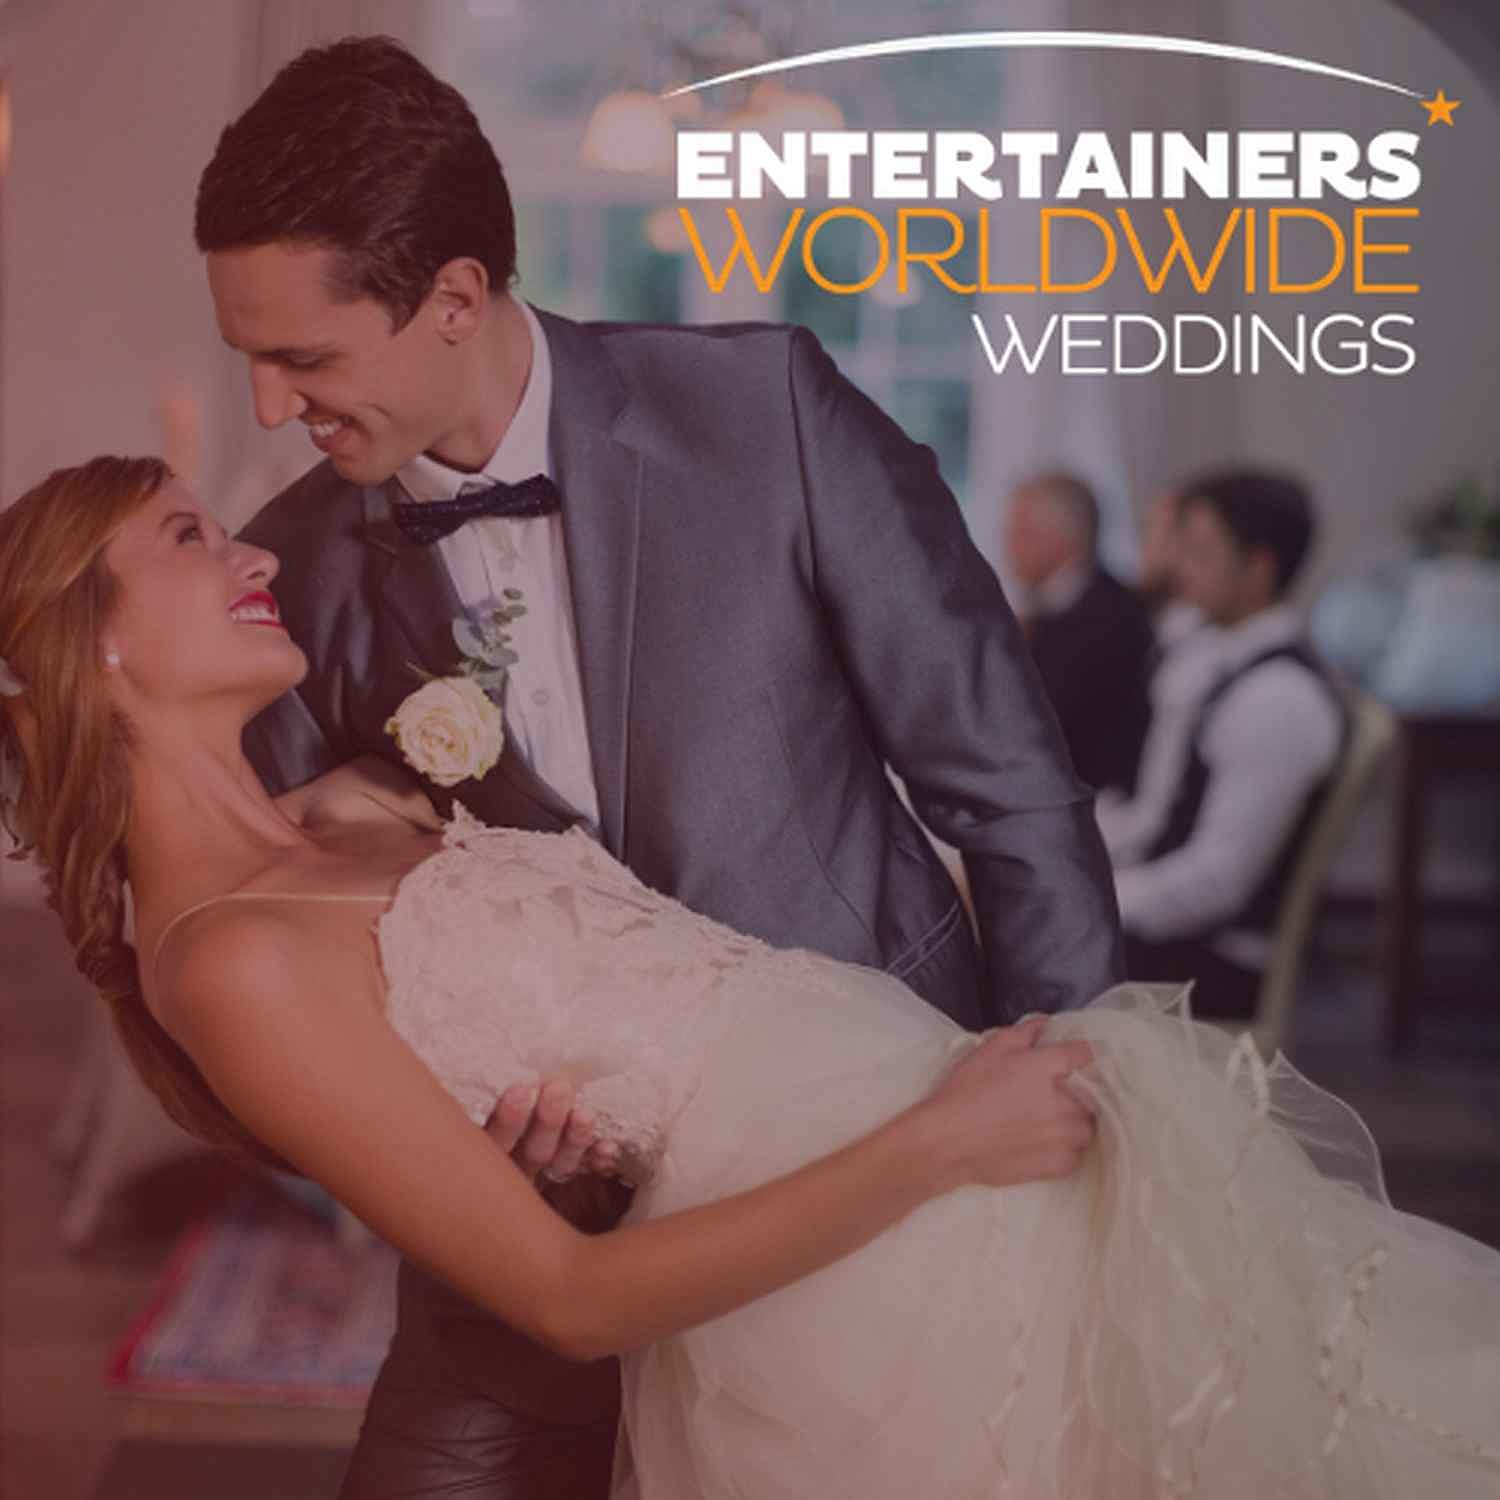 Where to meet wedding entertainers near you